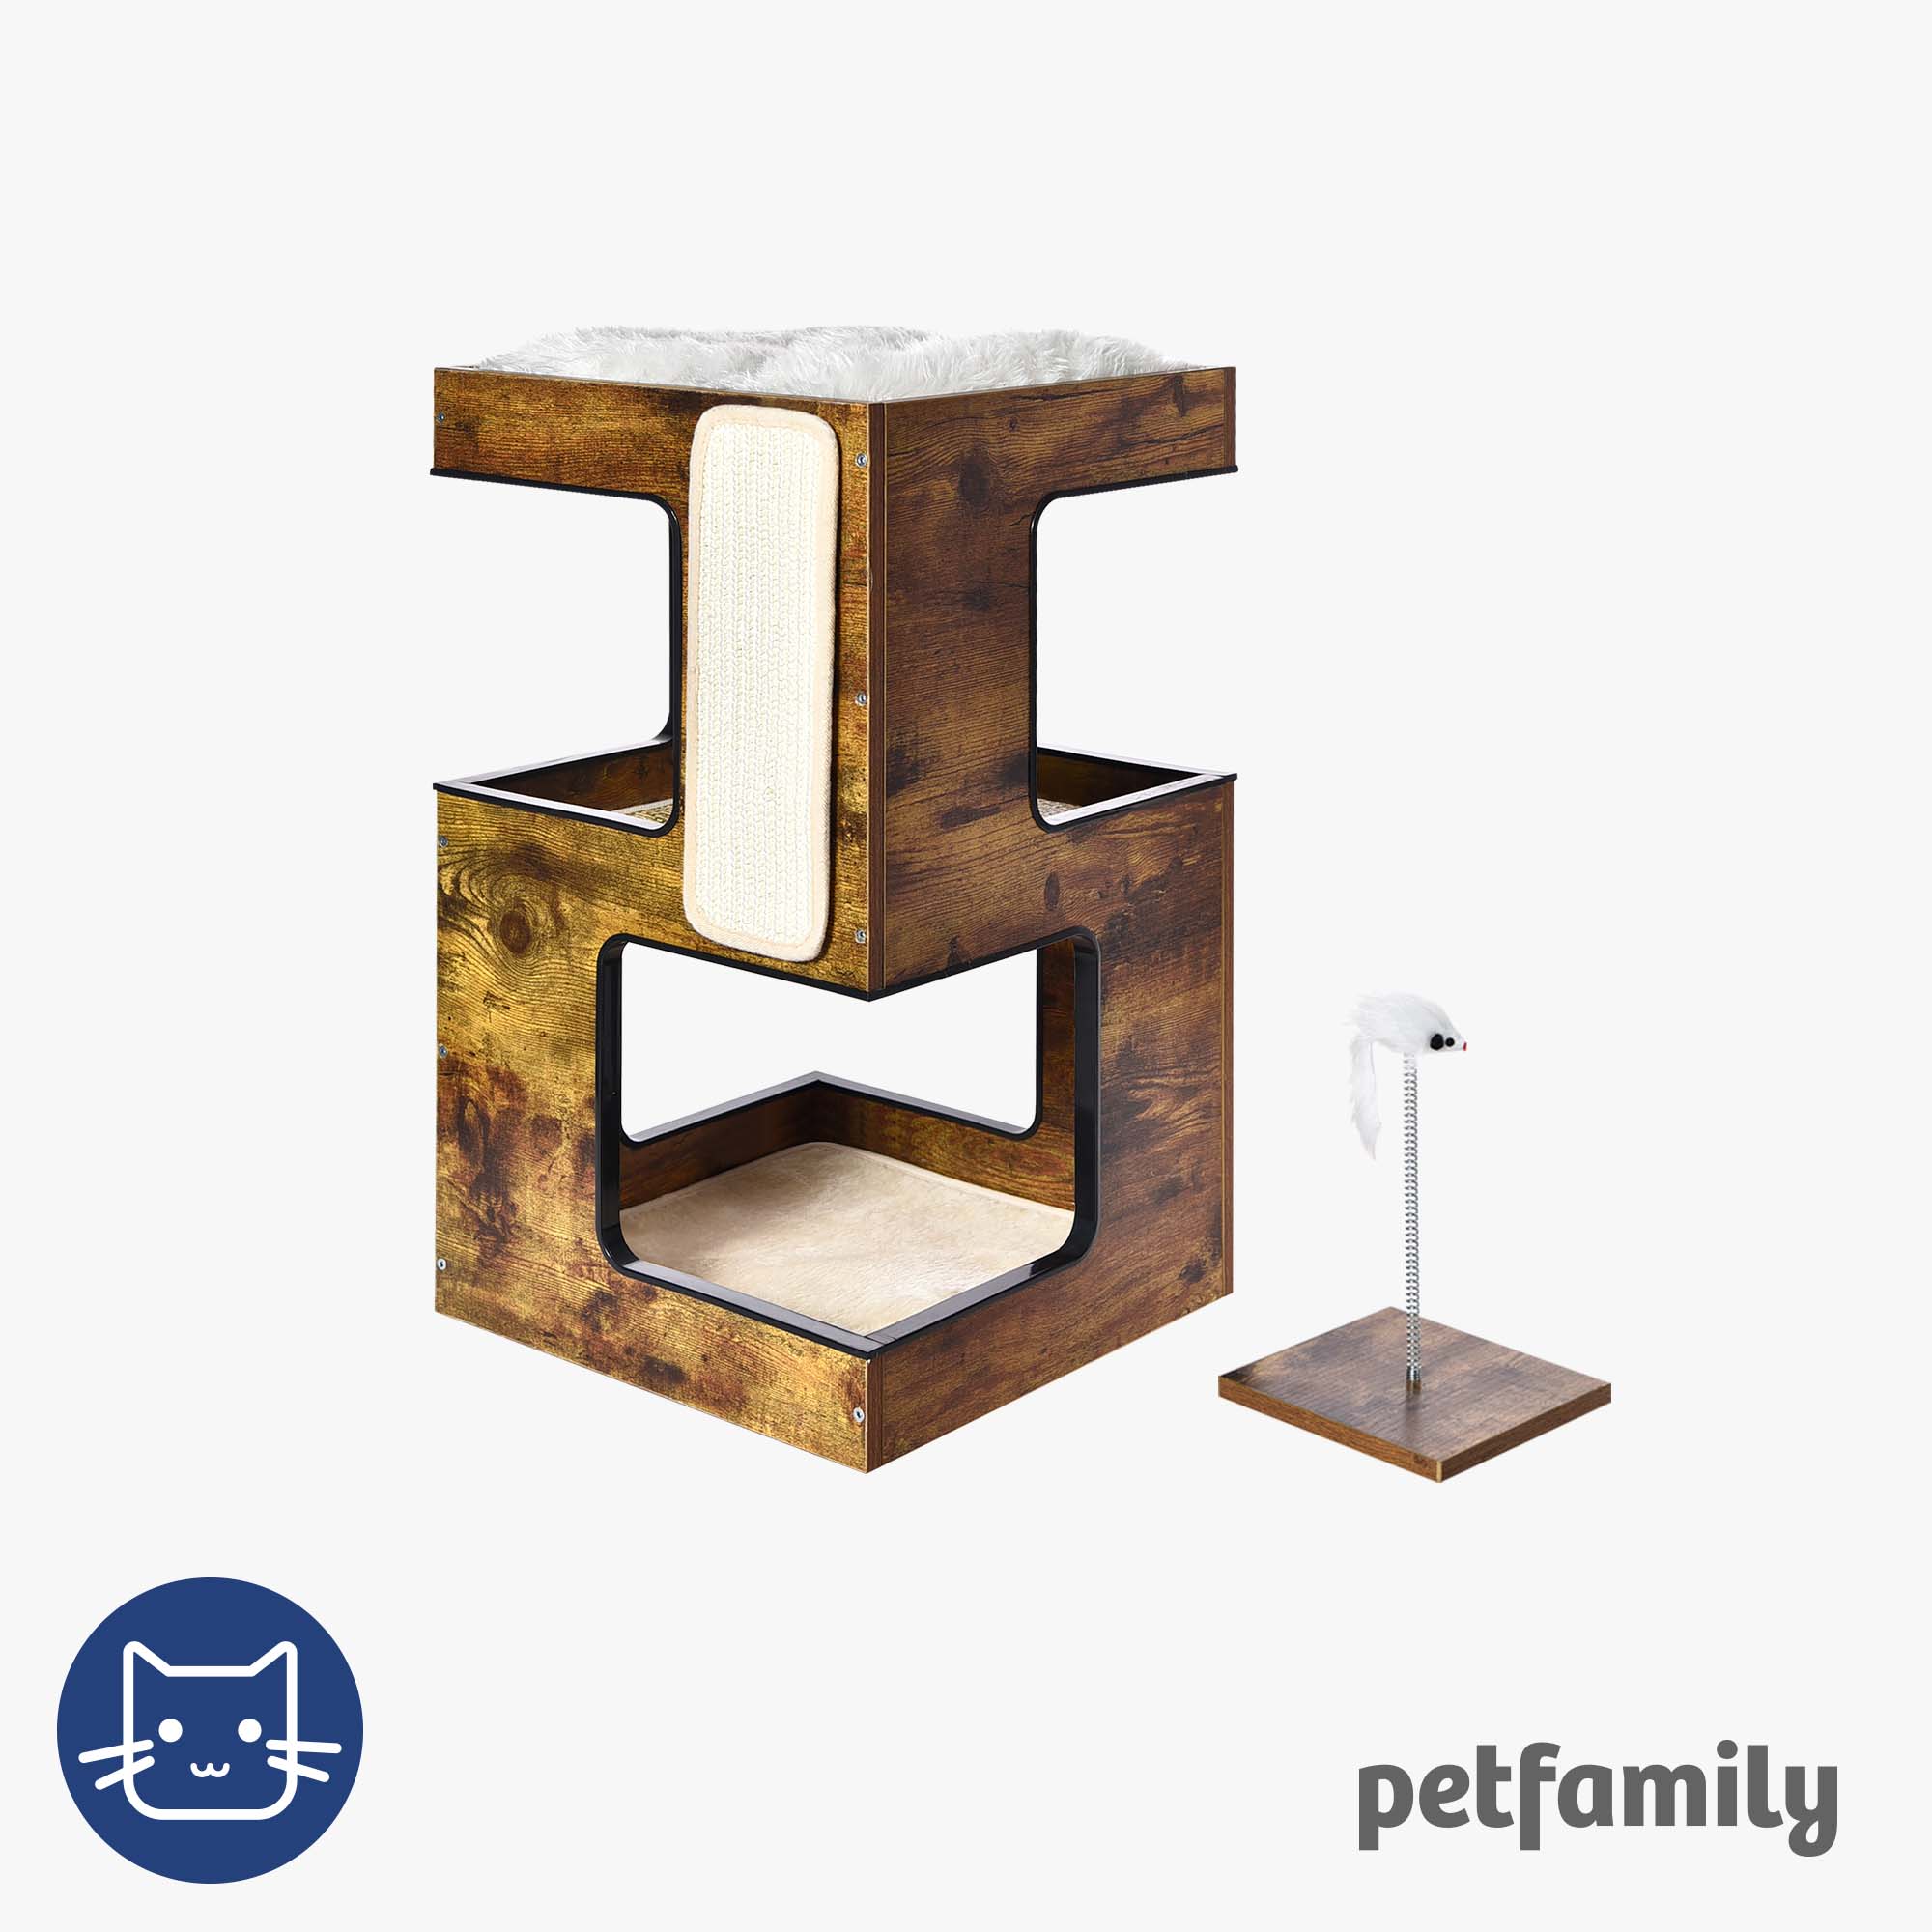 3 in 1 Wooden Cat Condo with Nightstand Function  - Petfamily